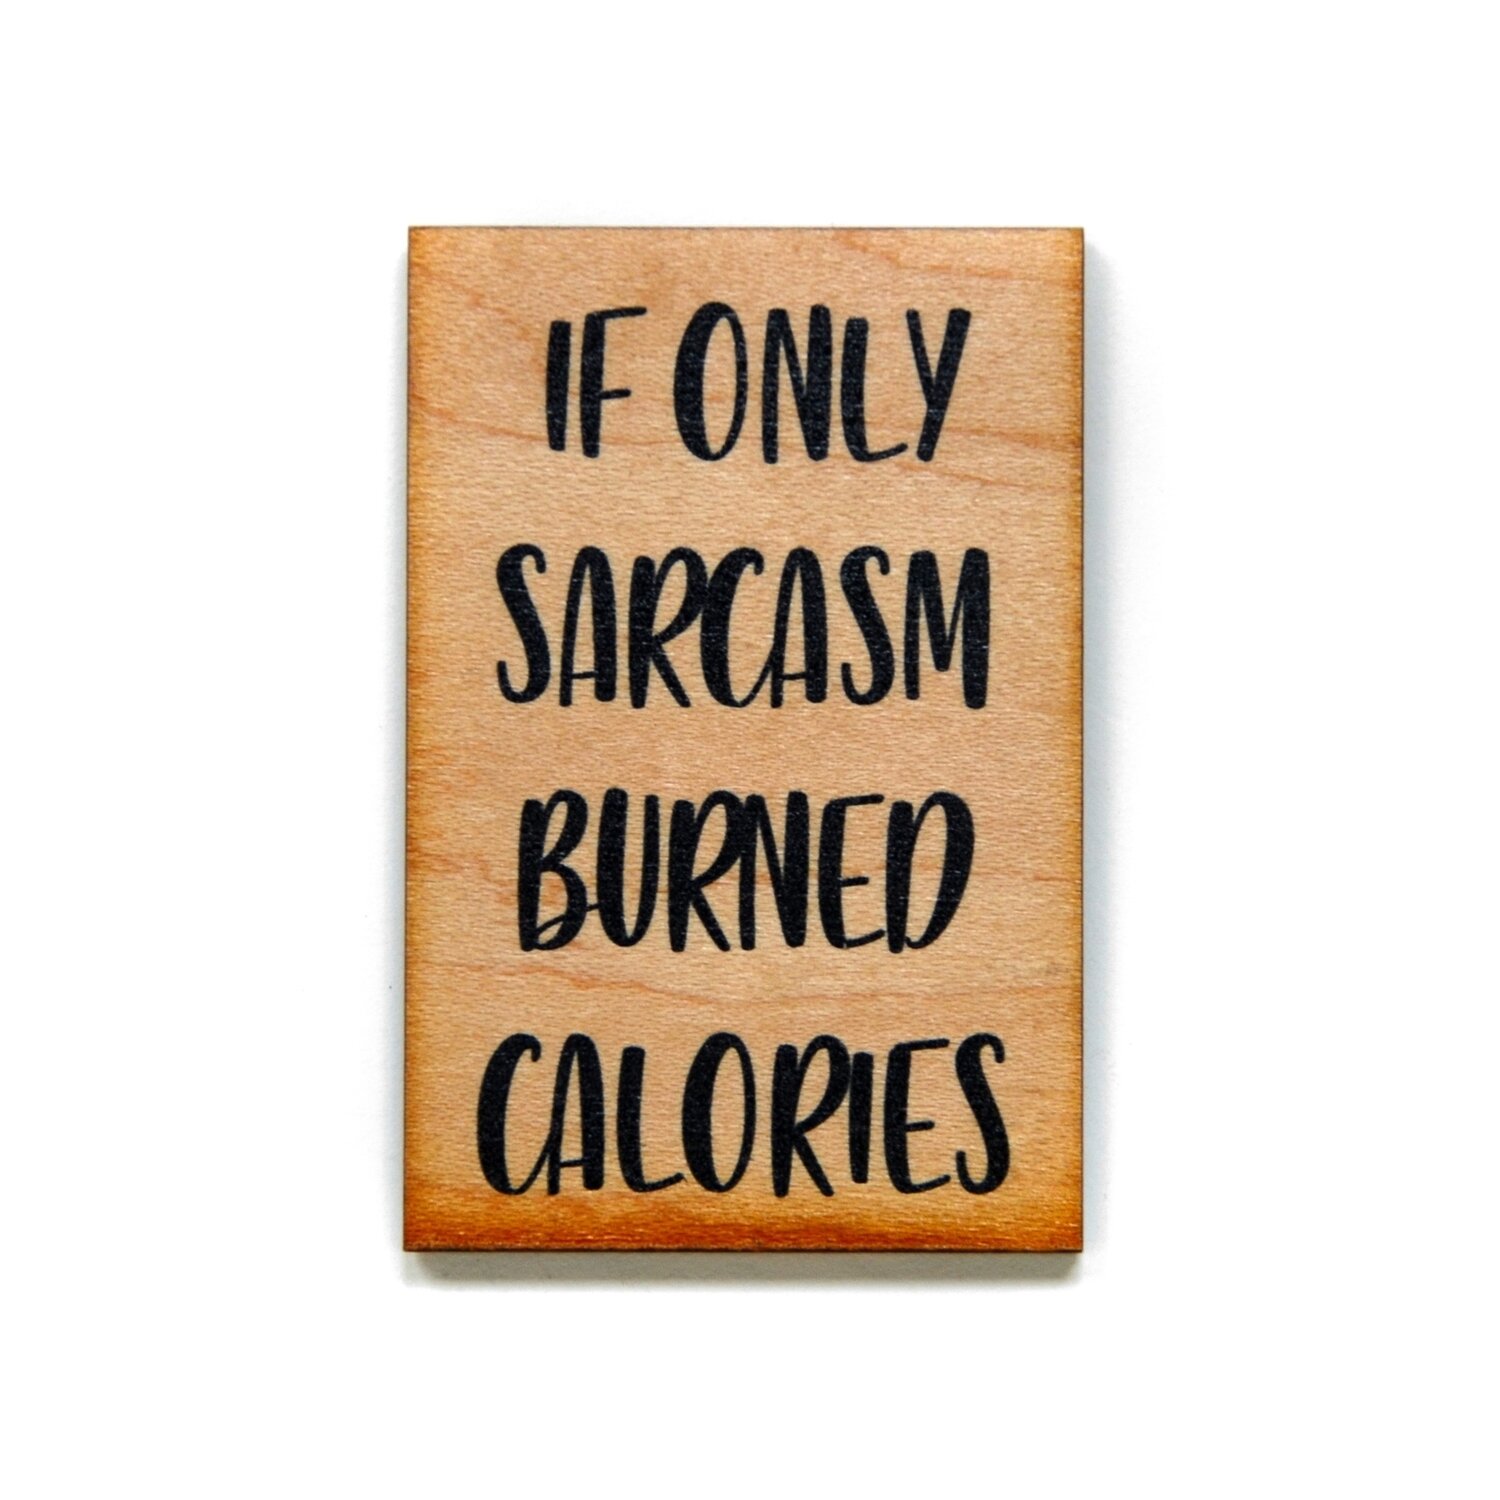 If Only Sarcasm Burned Calories Wooden Magnet